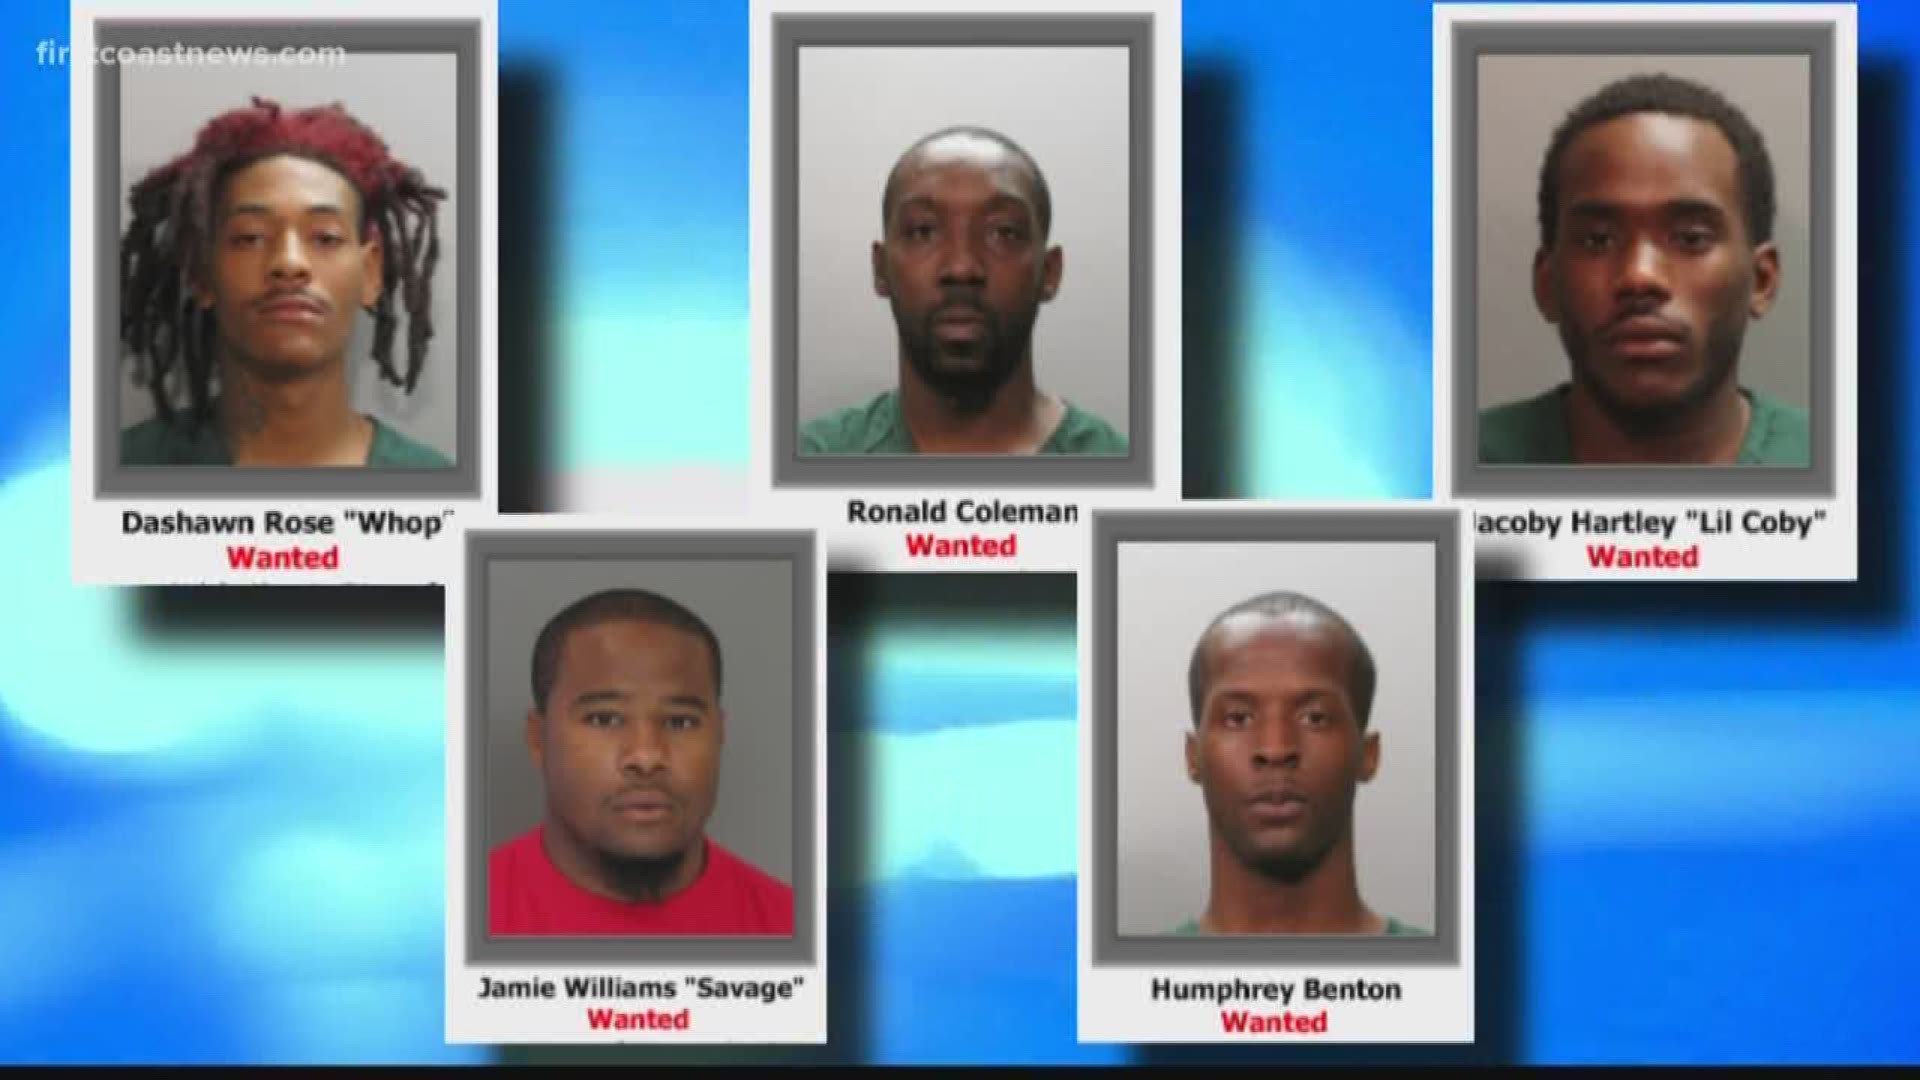 There are five suspects that still have an outstanding arrest warrant against them. They are Humphrey Benton, Jamie Williams "Savage," Jacoby Hartley "Lil Coby," Dashawn Rose "Whop," and Ronald Coleman.